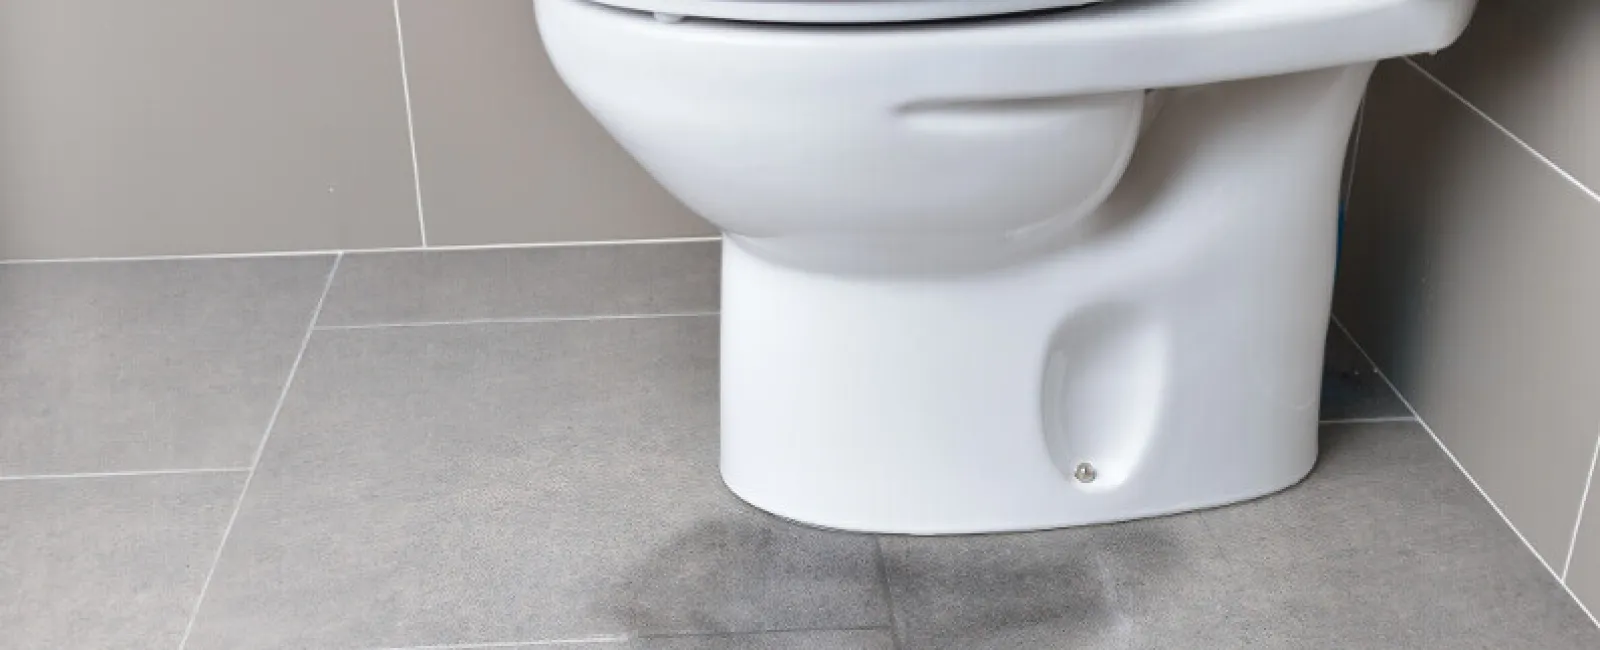 a toilet with a white seat